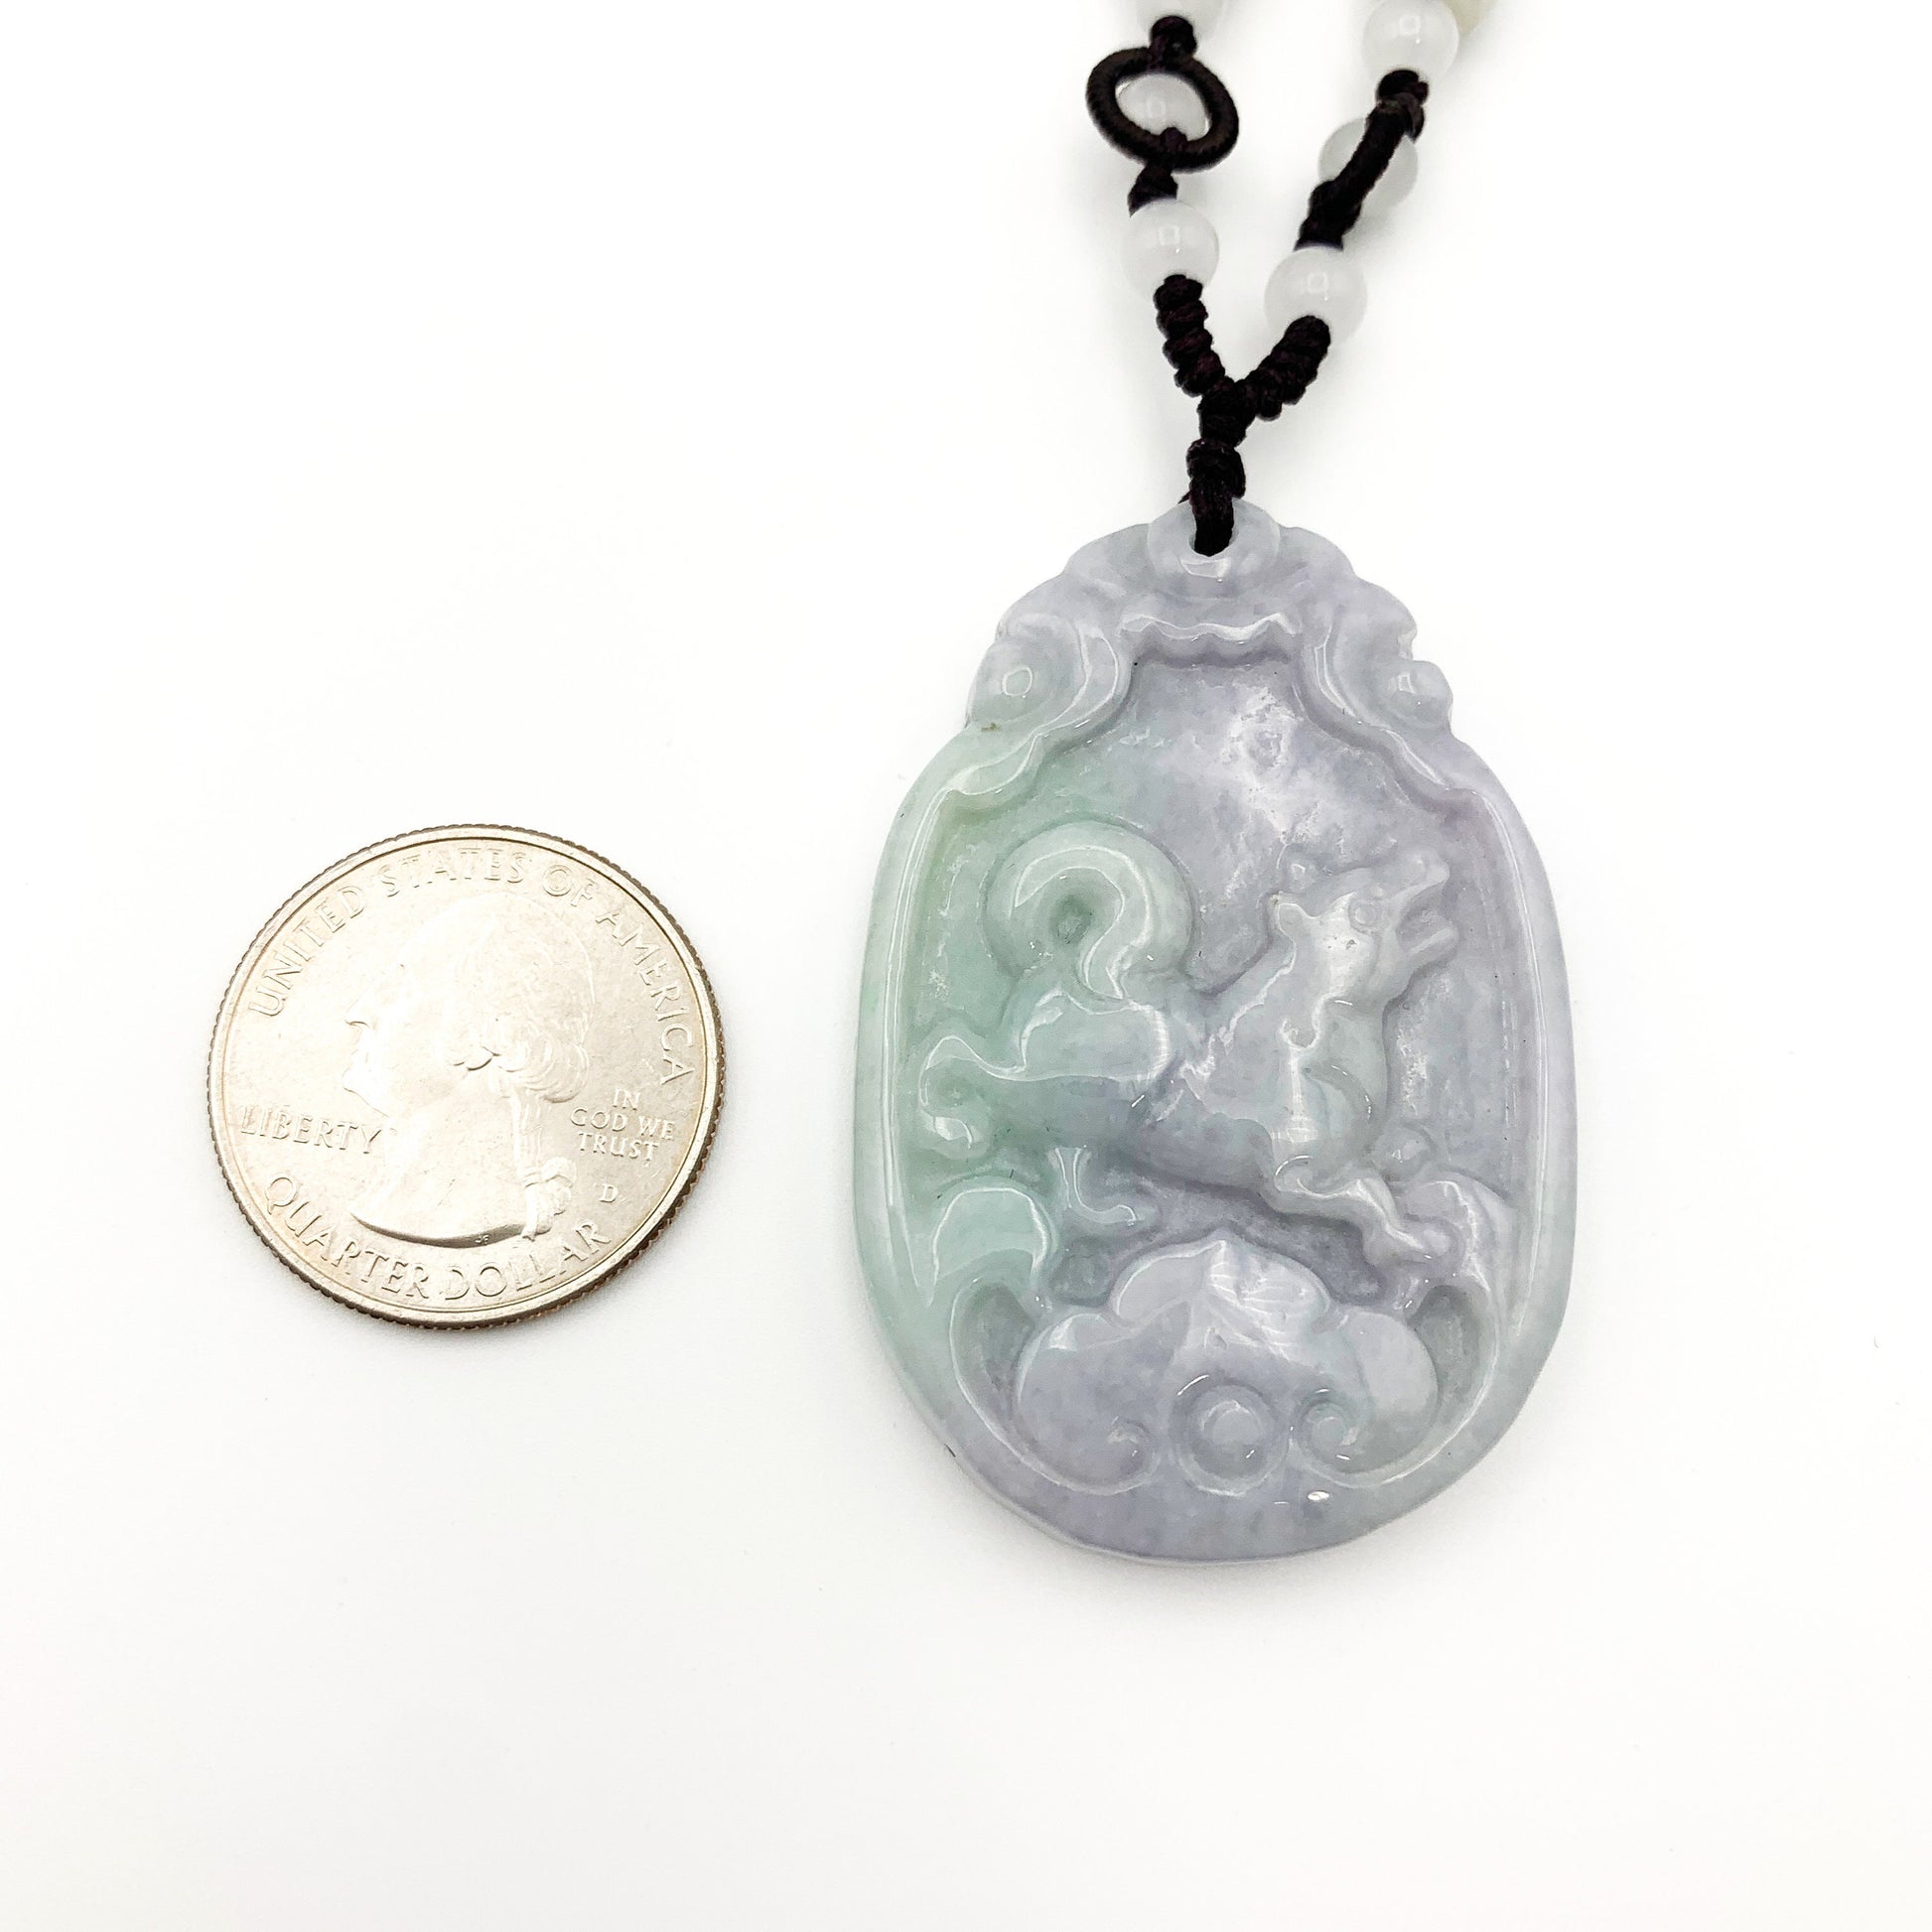 Jadeite Jade Dog Chinese Zodiac Carved Pendant Necklace, YW-0110-1646608995 - AriaDesignCollection